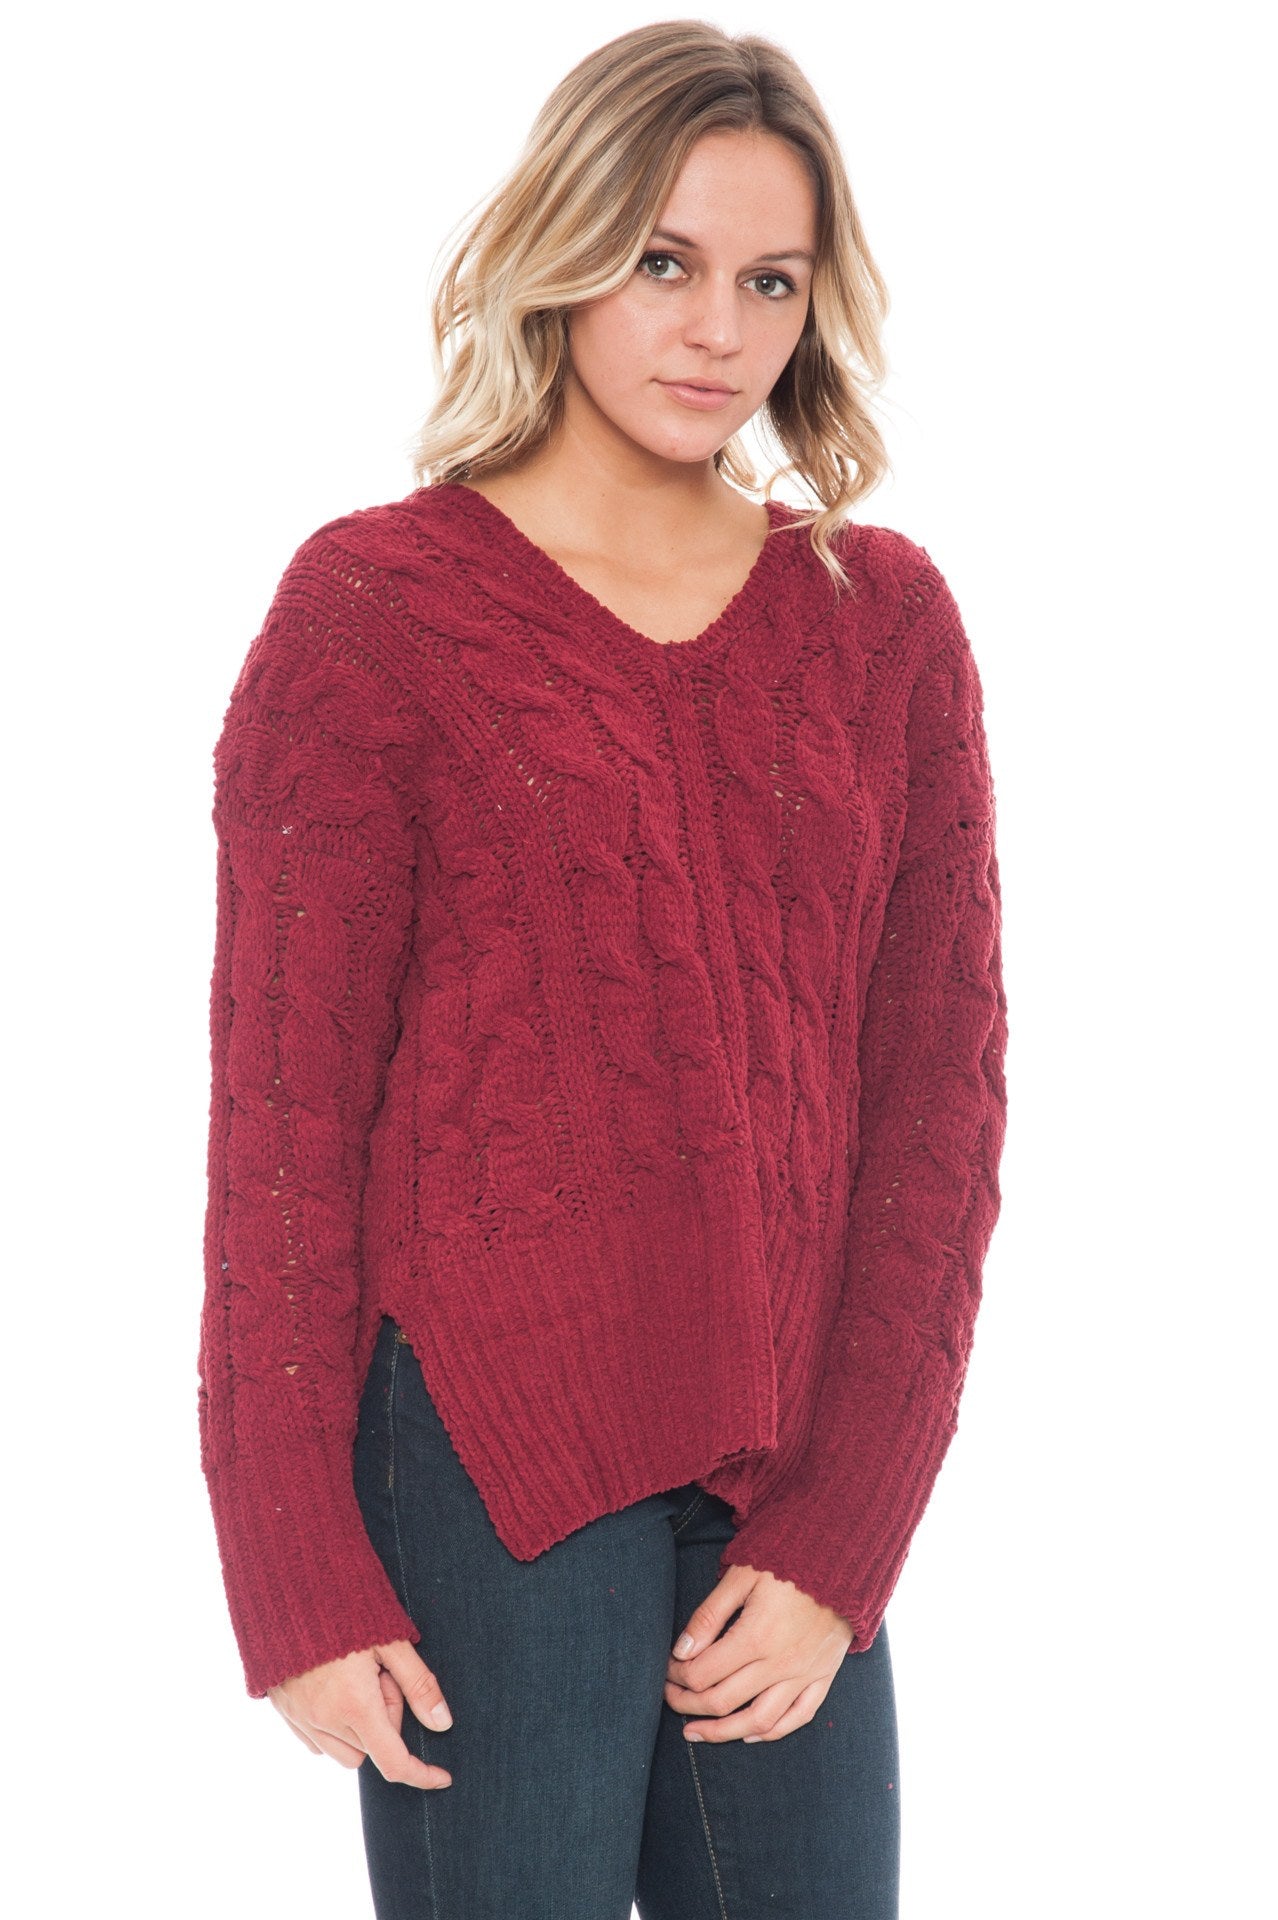 Sweater - Side Slit Cable Knit Top by Paper Crane